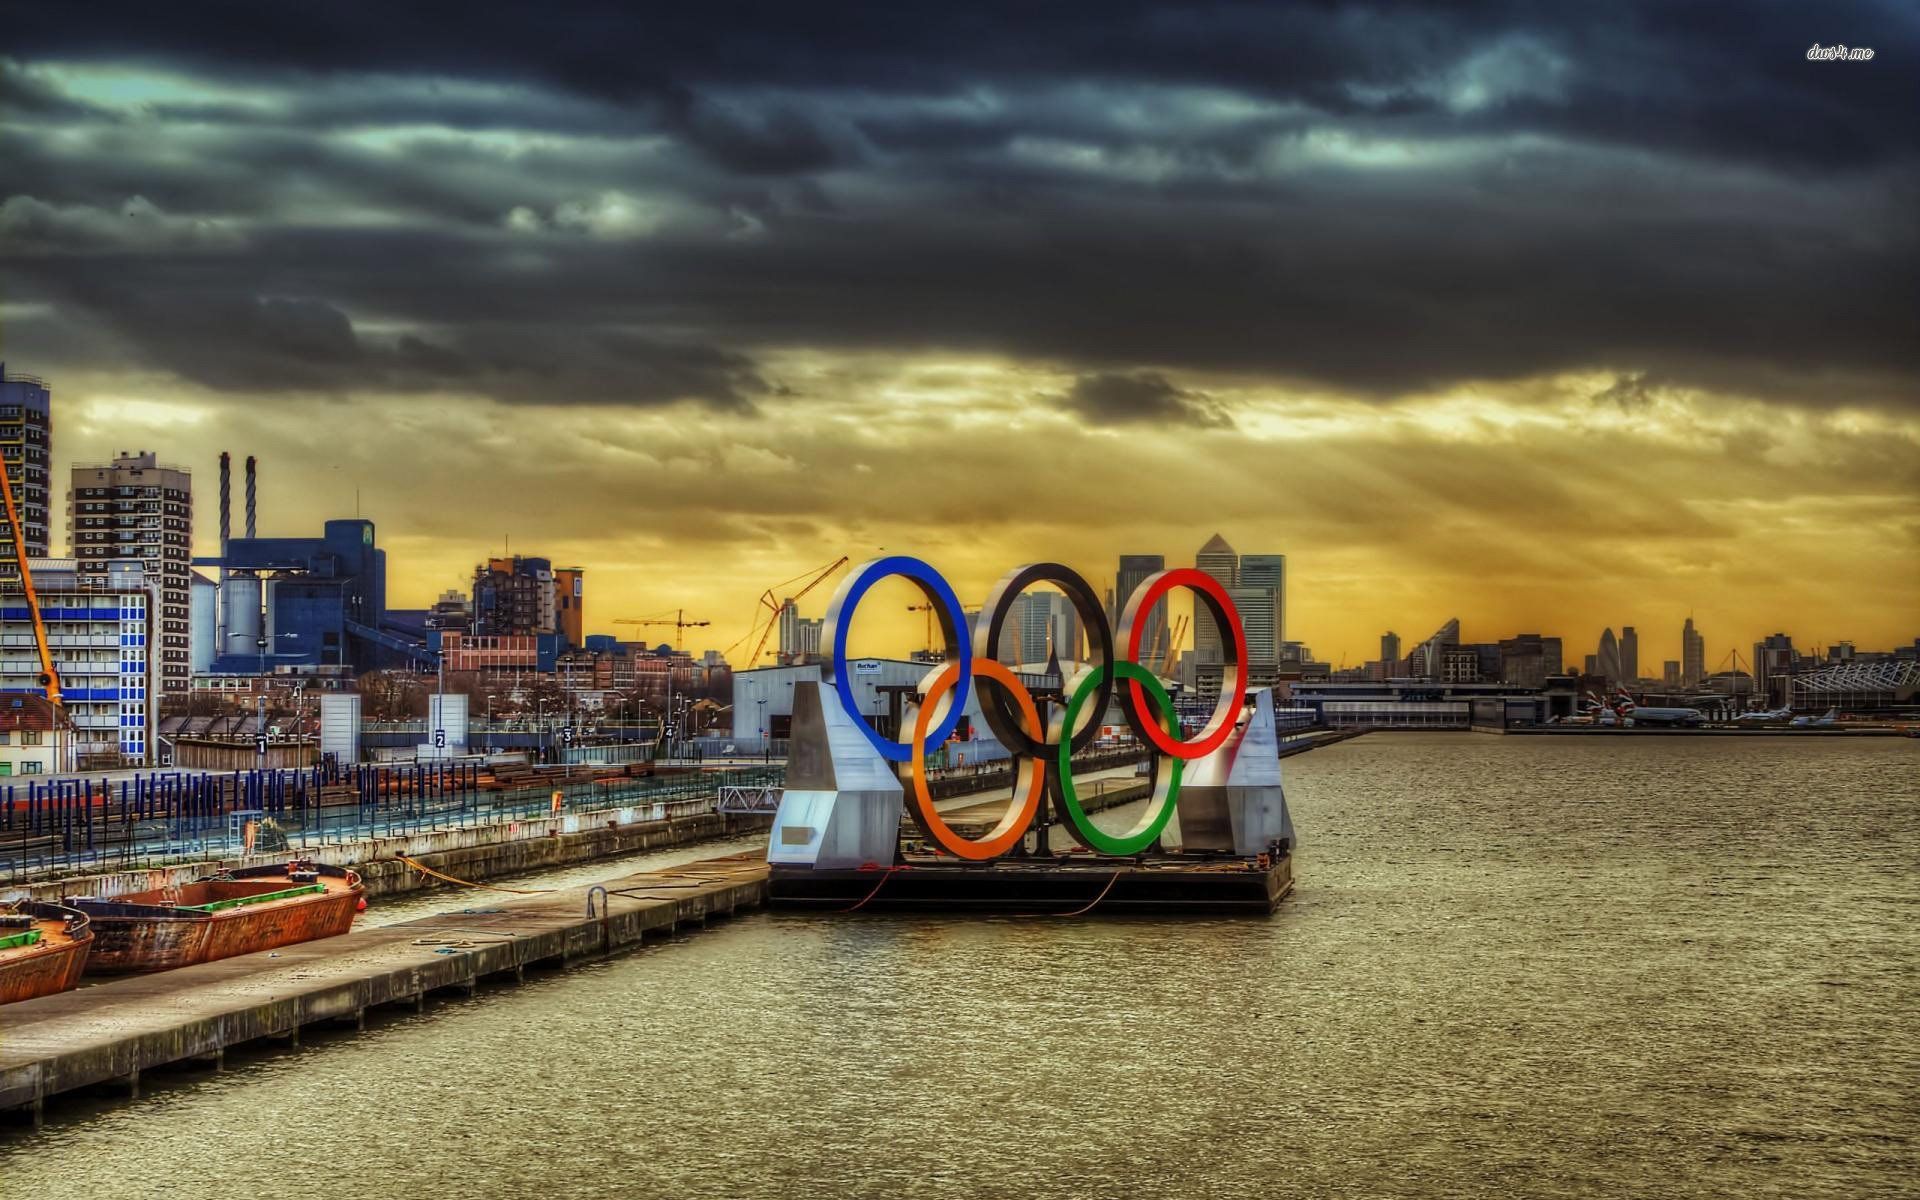 Olympic Games HD Wallpaper Background Wallpaper. Olympics facts, Olympic venues, London olympic logo